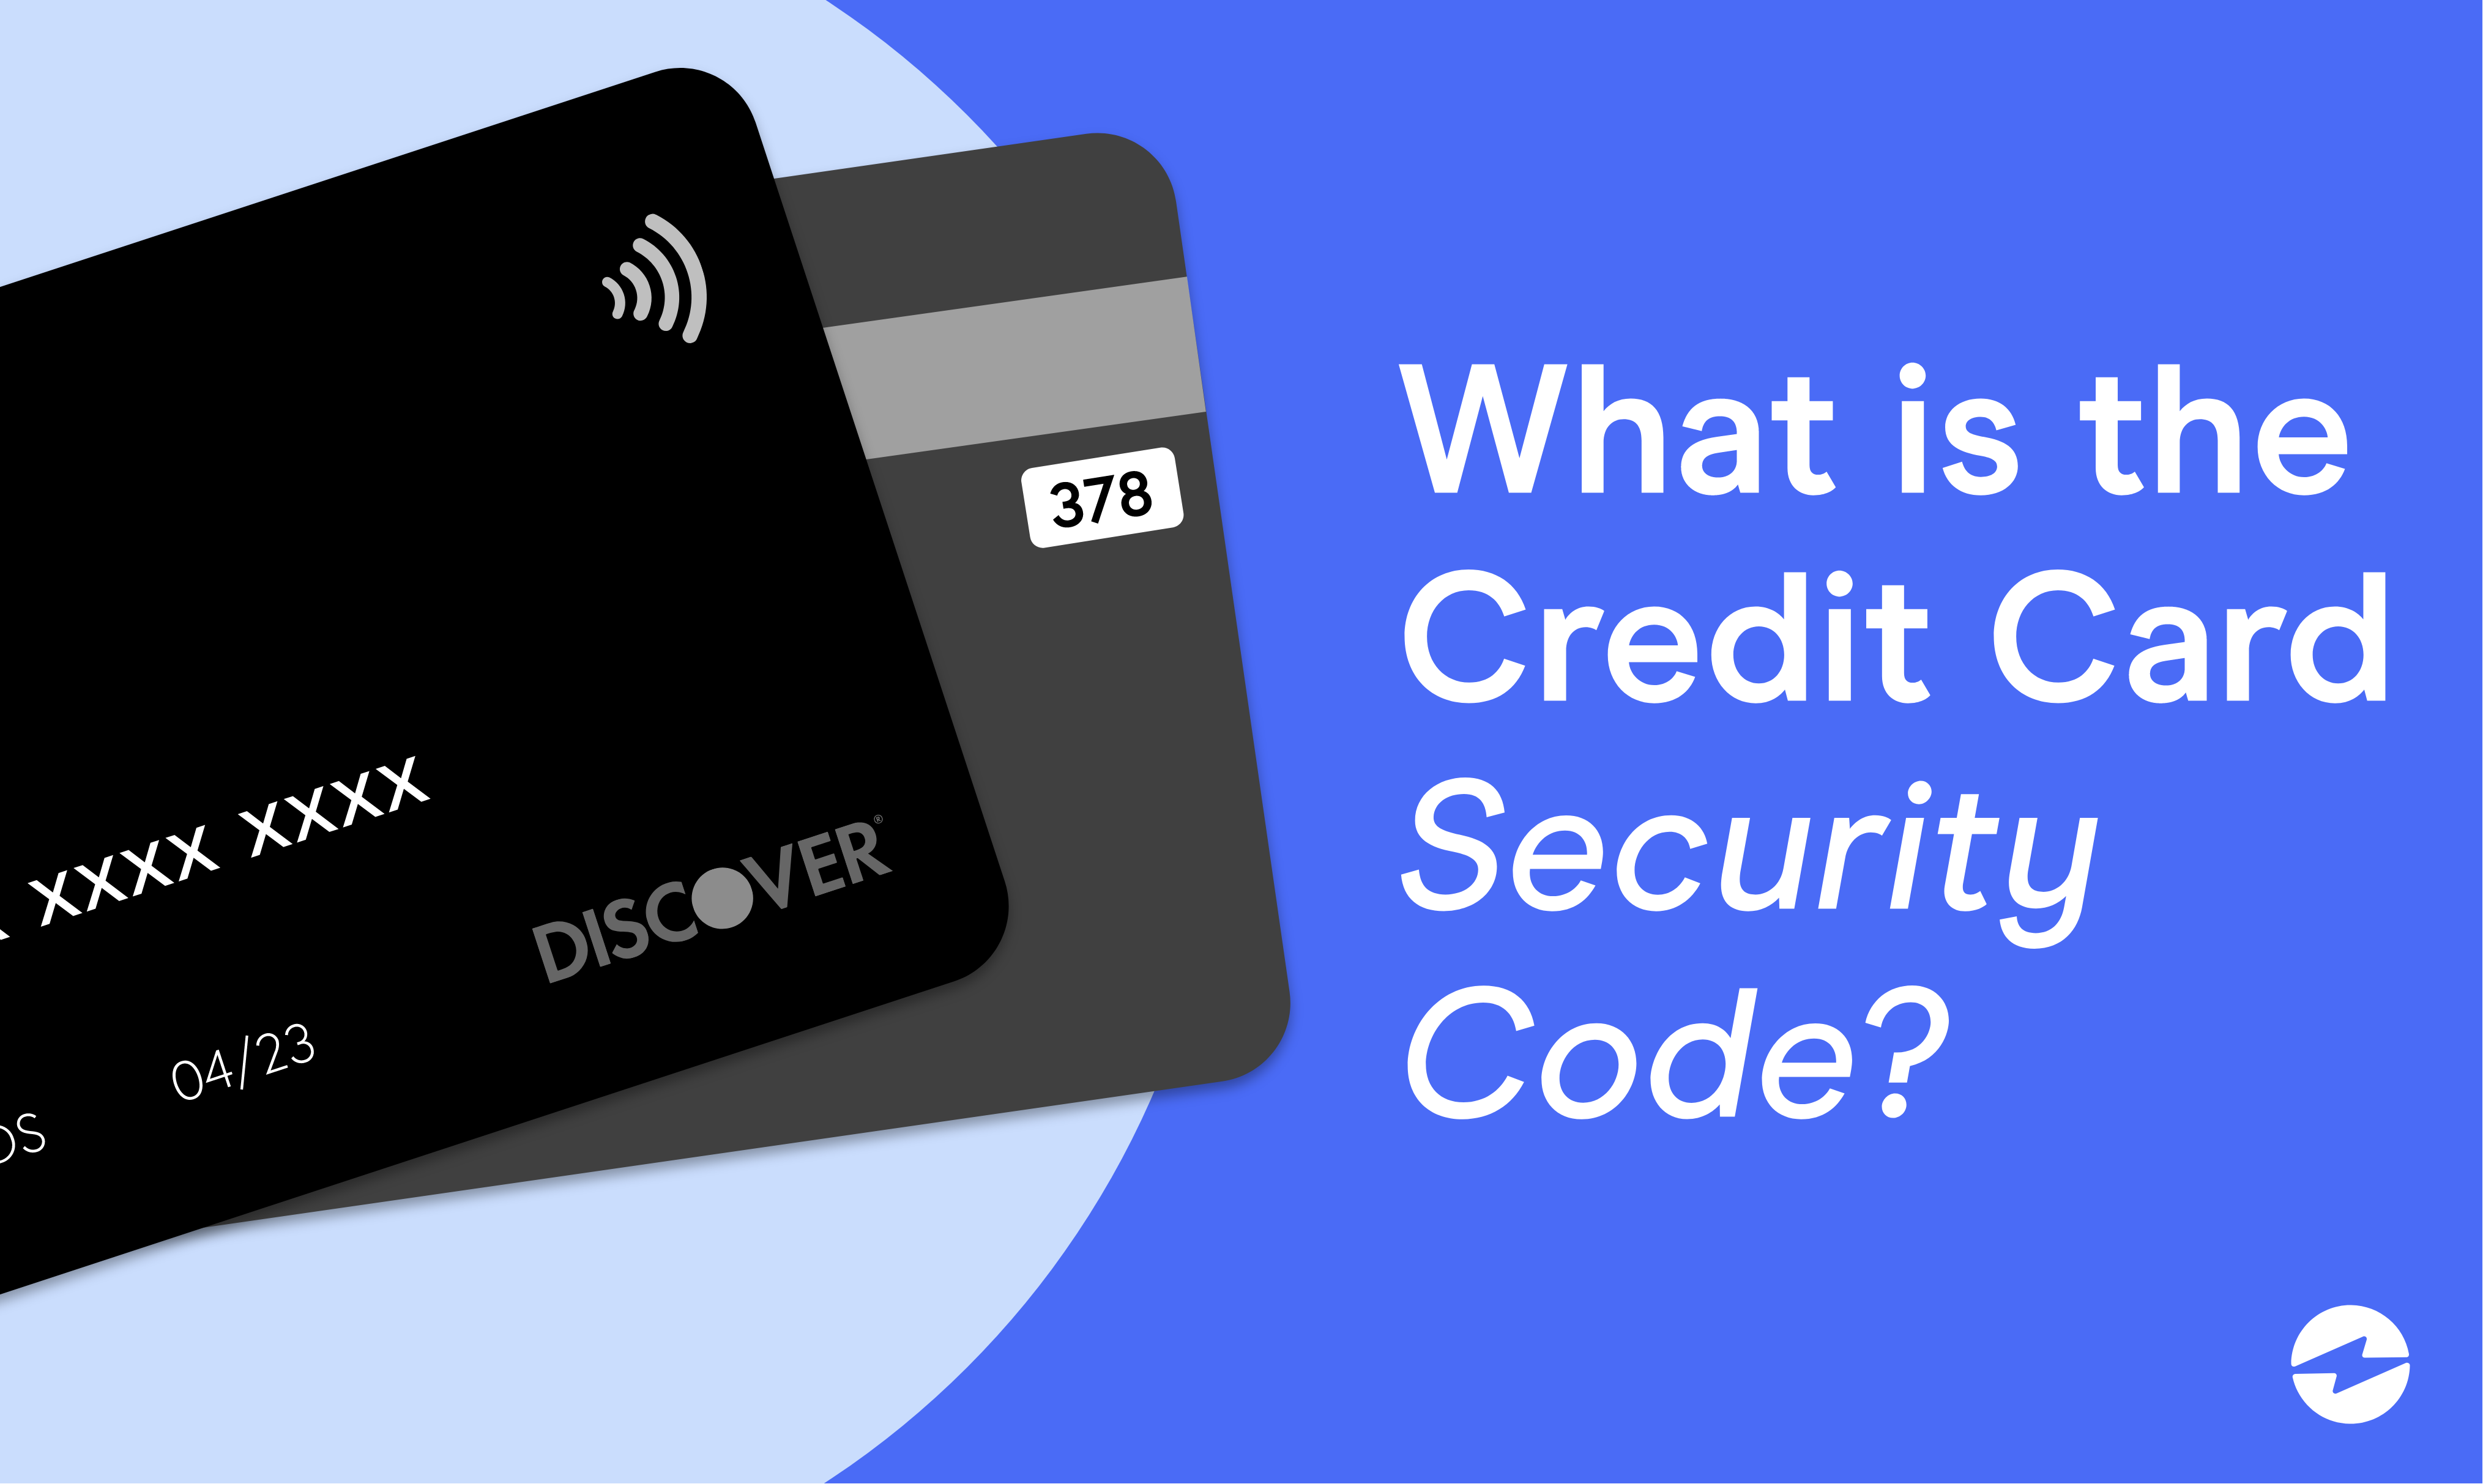 What is the Credit Card Security Code